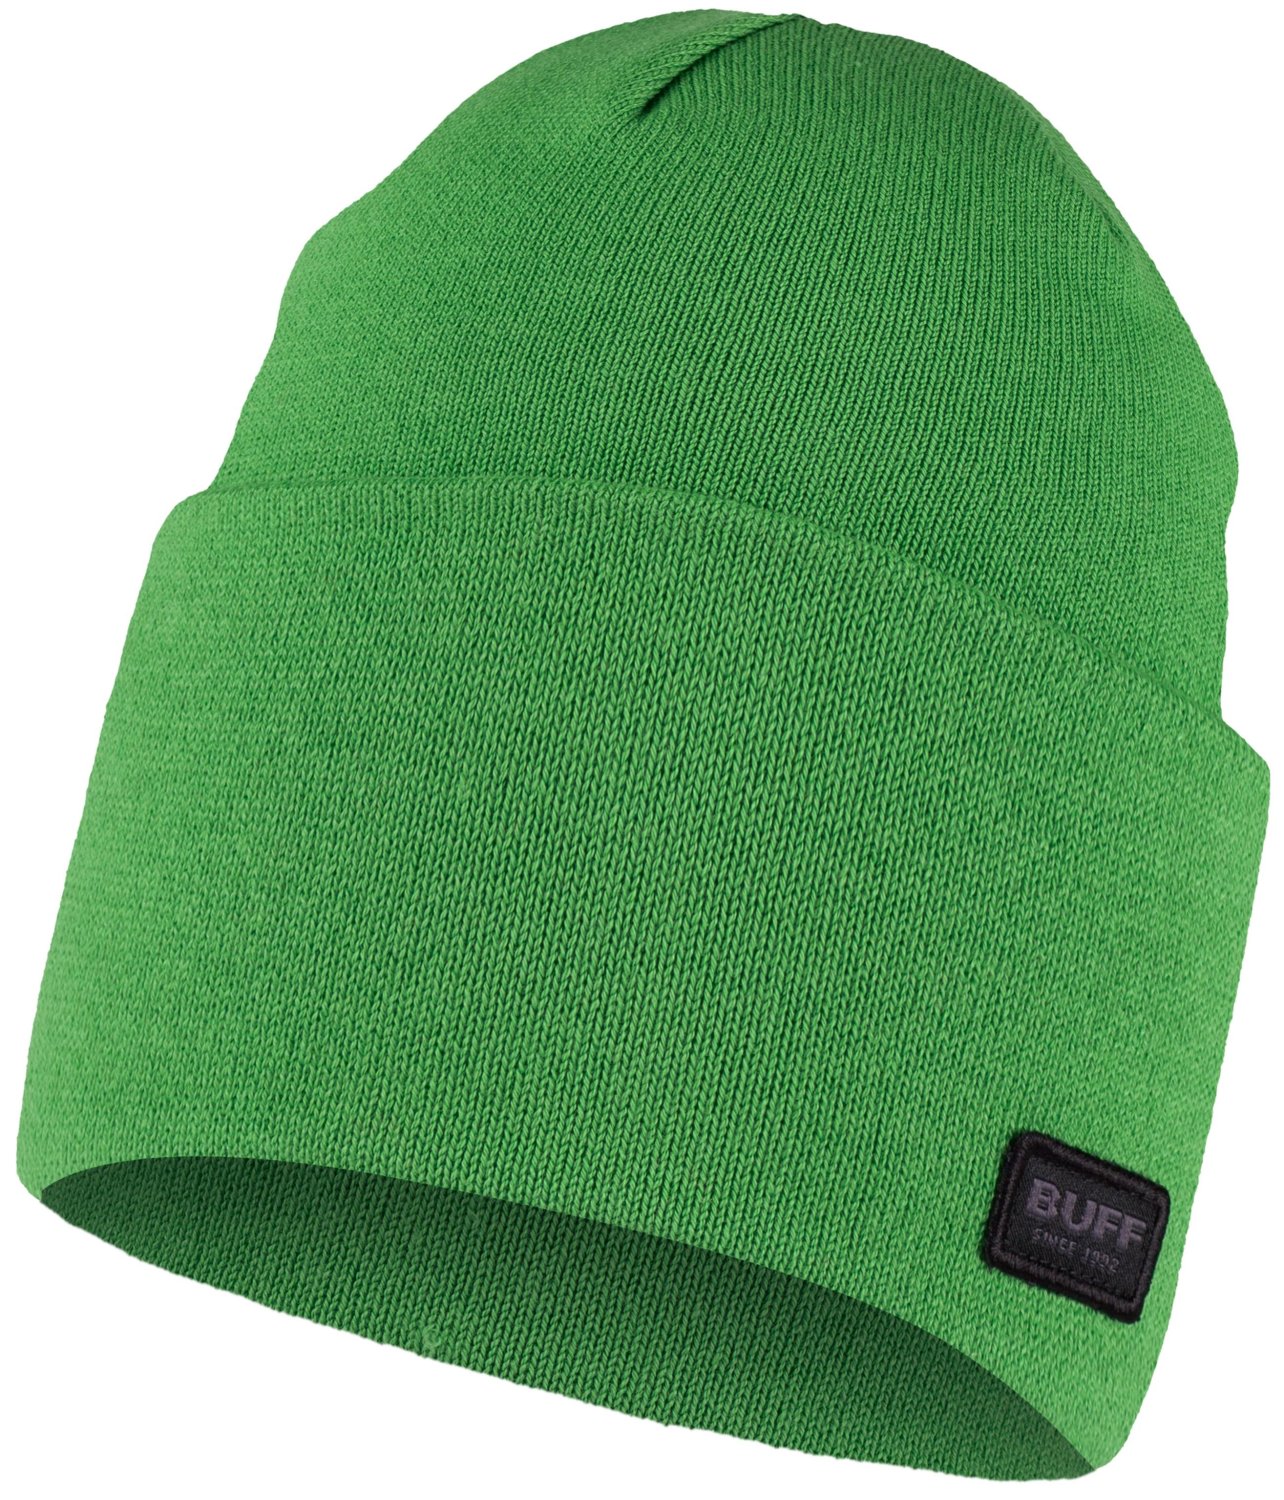 Шапка Buff Knitted Hat Niels Mint, US:one size, 126457.813.10.00 шапка buff knitted hat niels cru us one size 126457 014 10 00